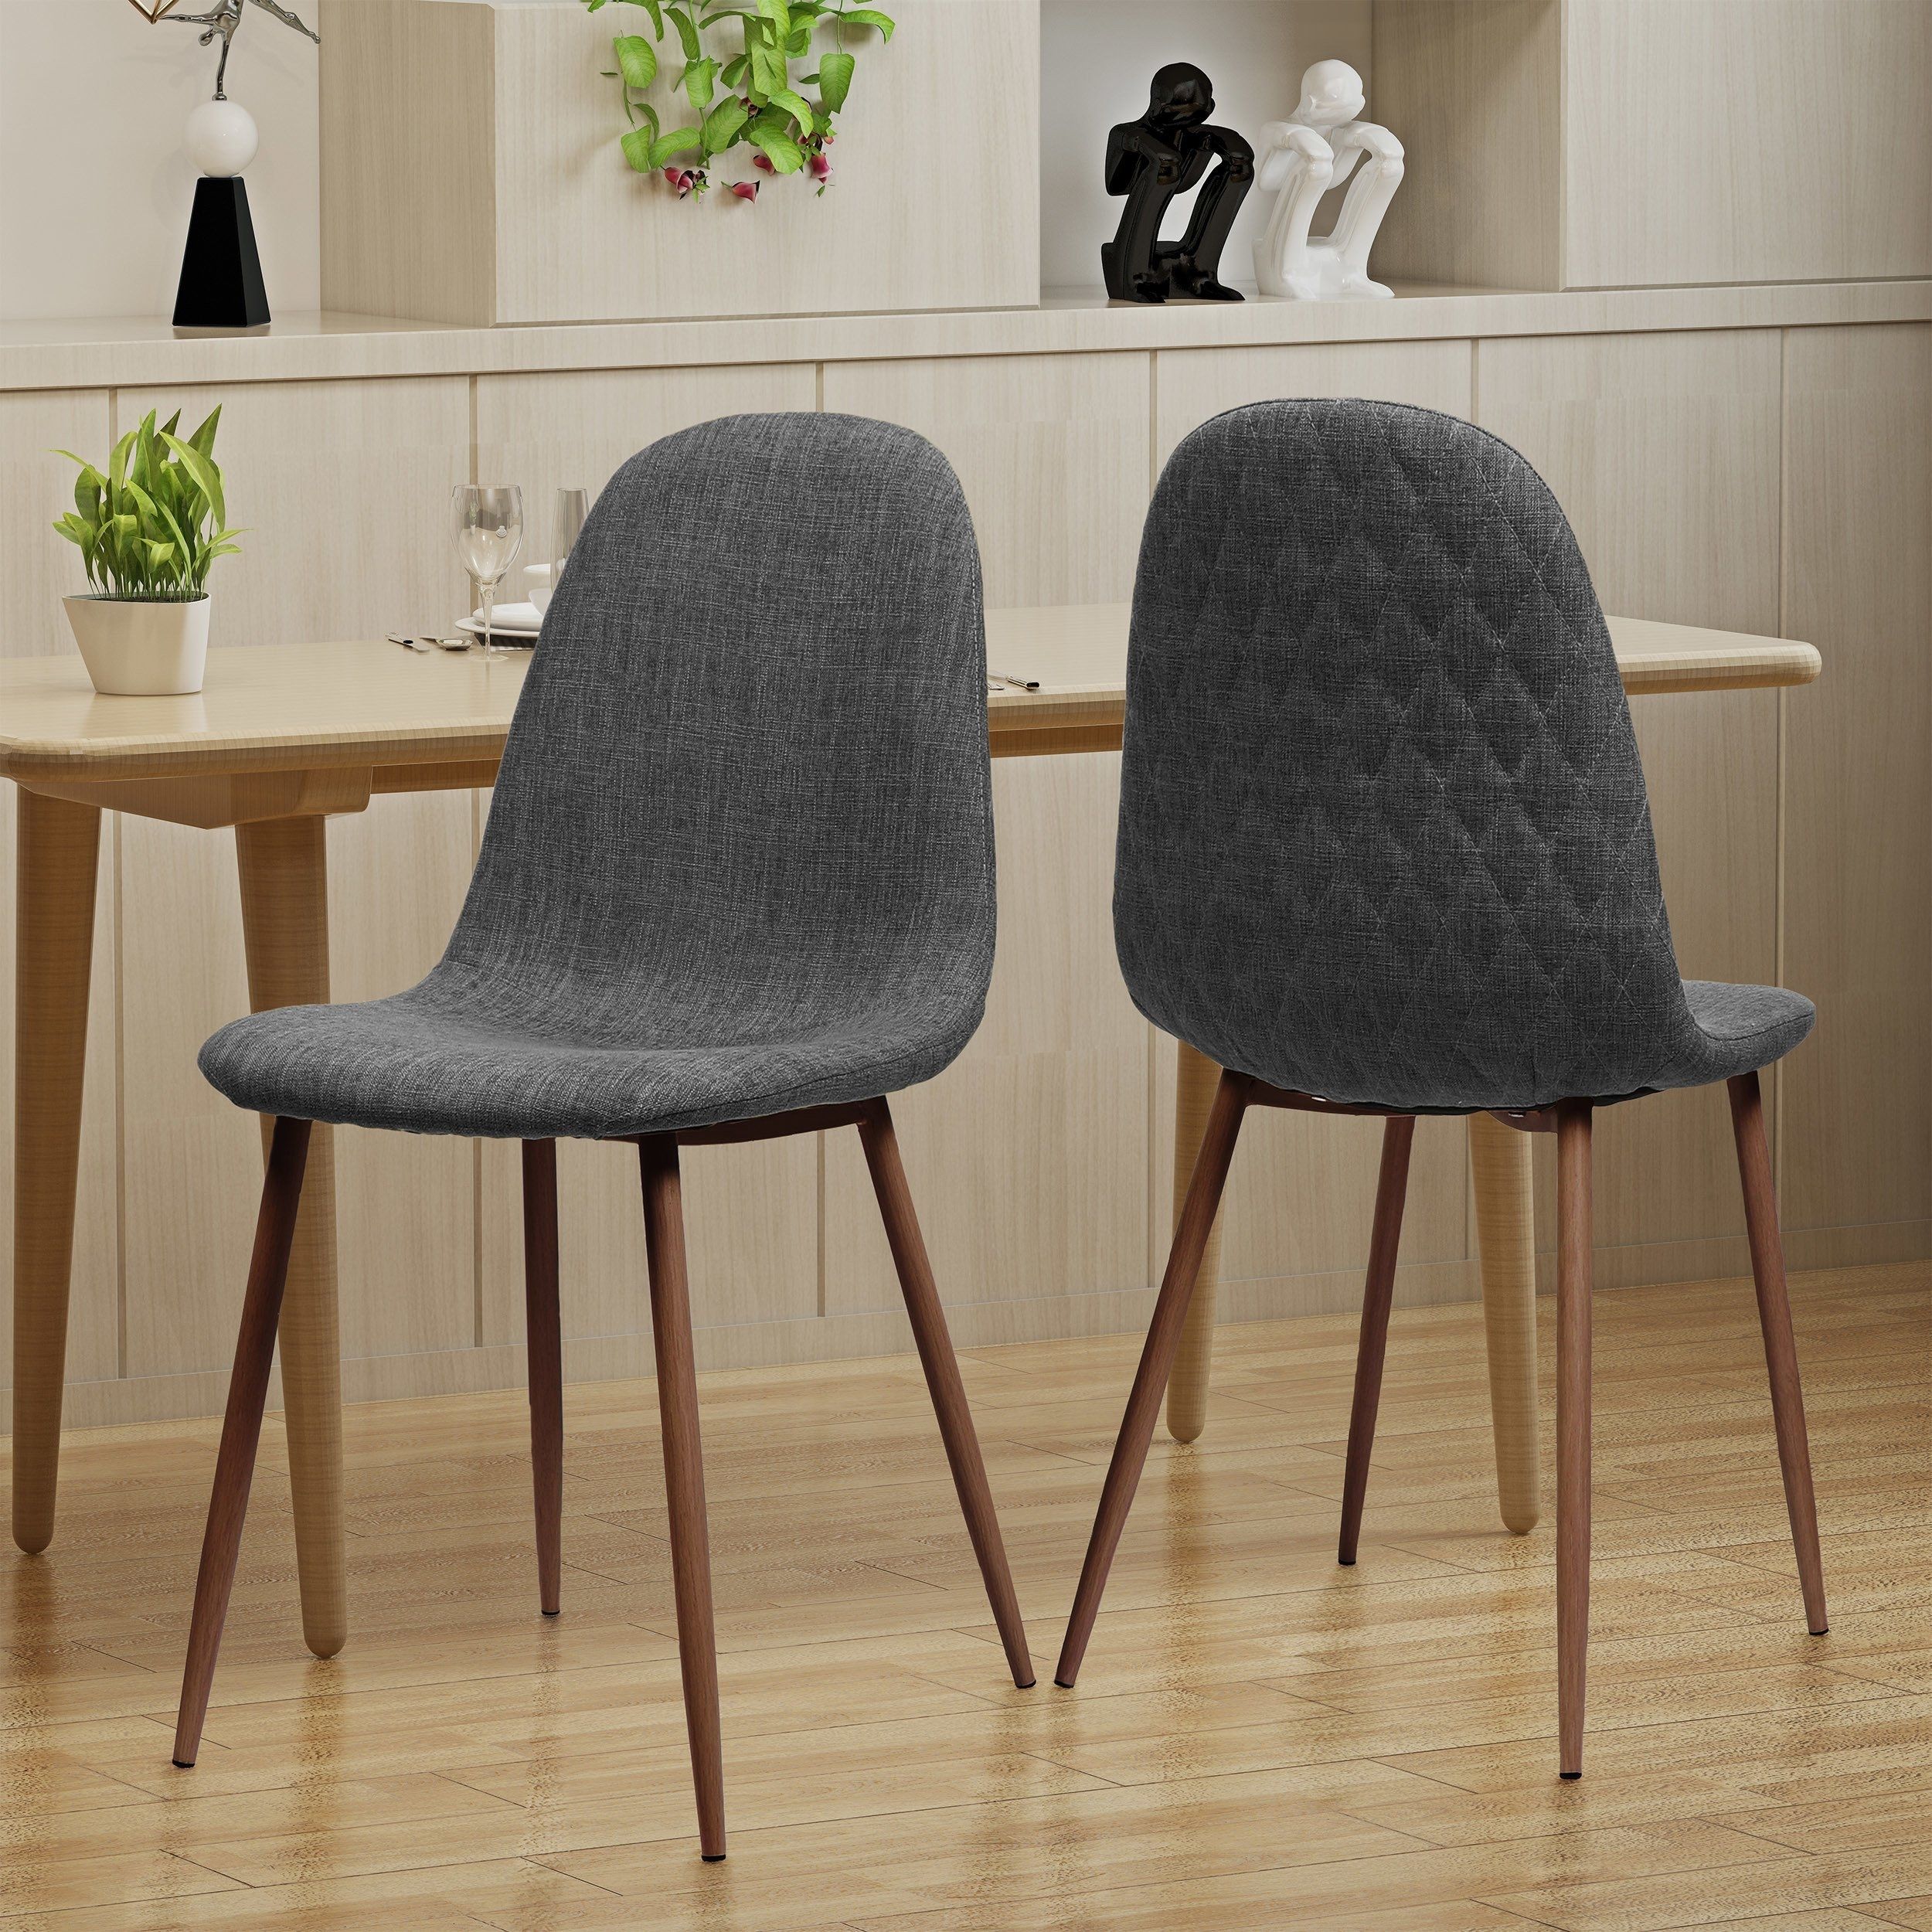 Well Known Caden Upholstered Side Chairs Regarding Shop Caden Mid Century Fabric Dining Chair (set Of 2)christopher (View 5 of 20)